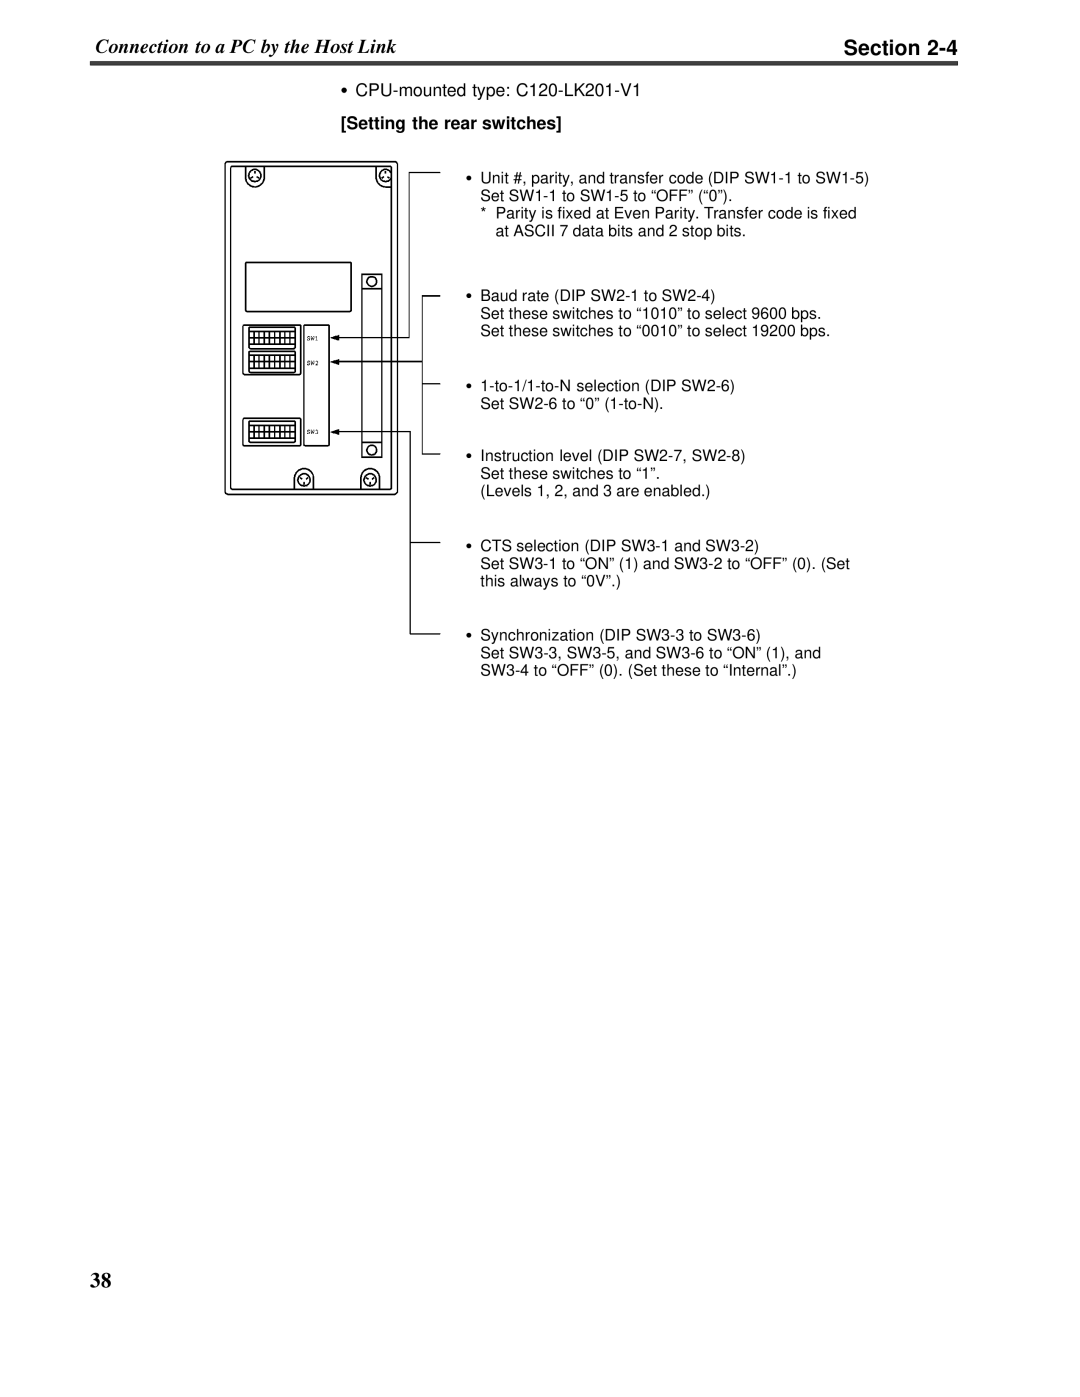 Omron V022-E3-1 operation manual Section, CPU-mountedtype: C120-LK201-V1, Setting the rear switches 